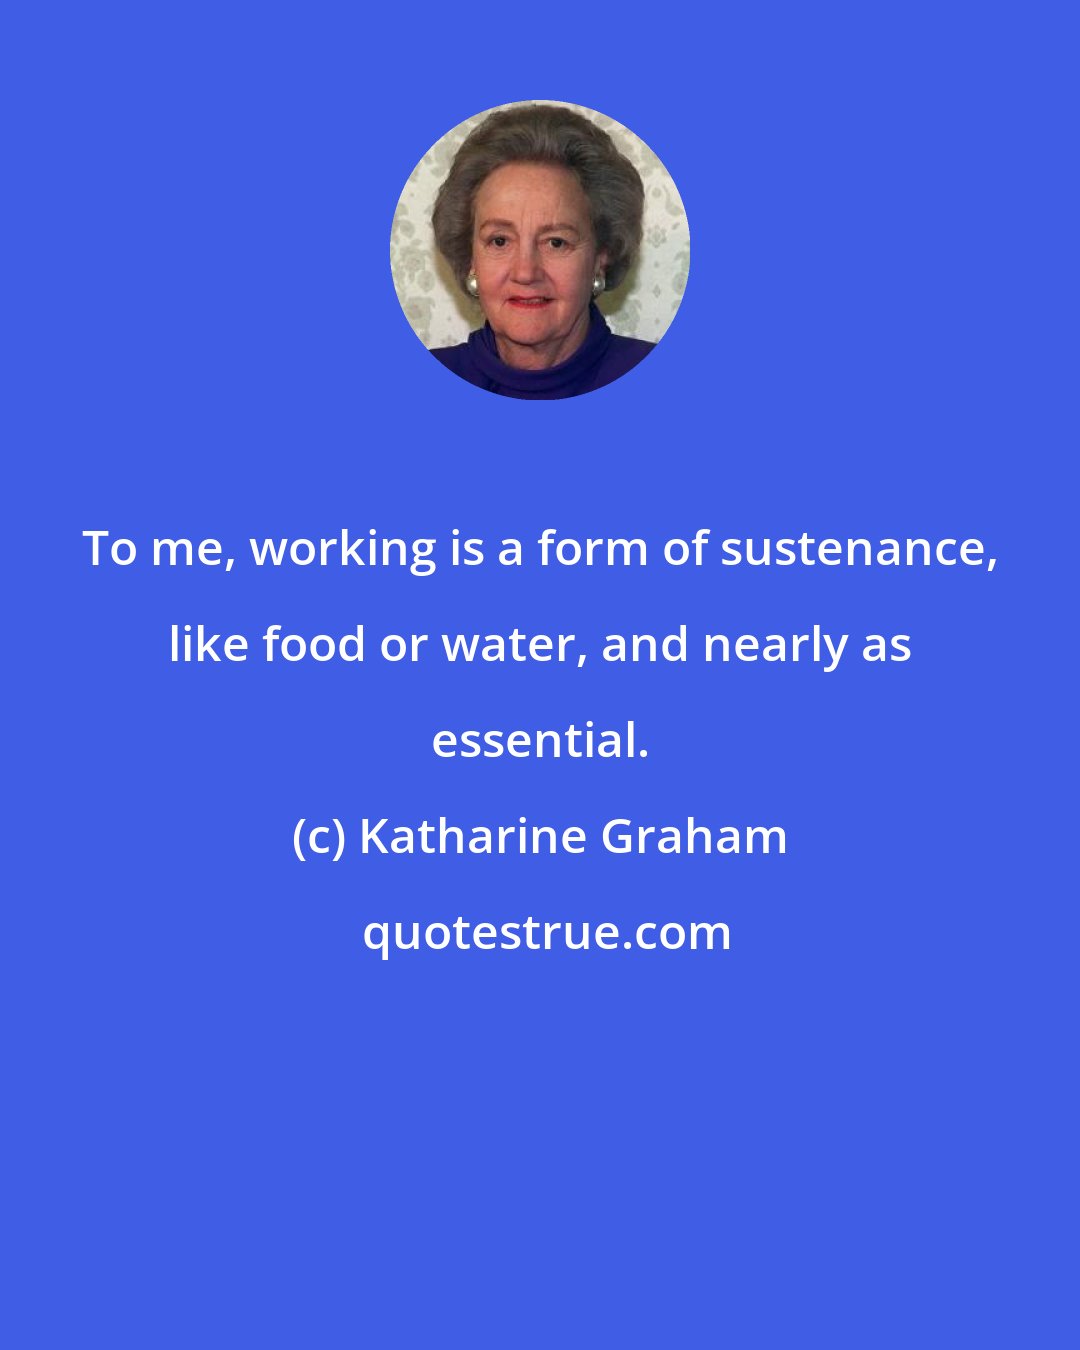 Katharine Graham: To me, working is a form of sustenance, like food or water, and nearly as essential.